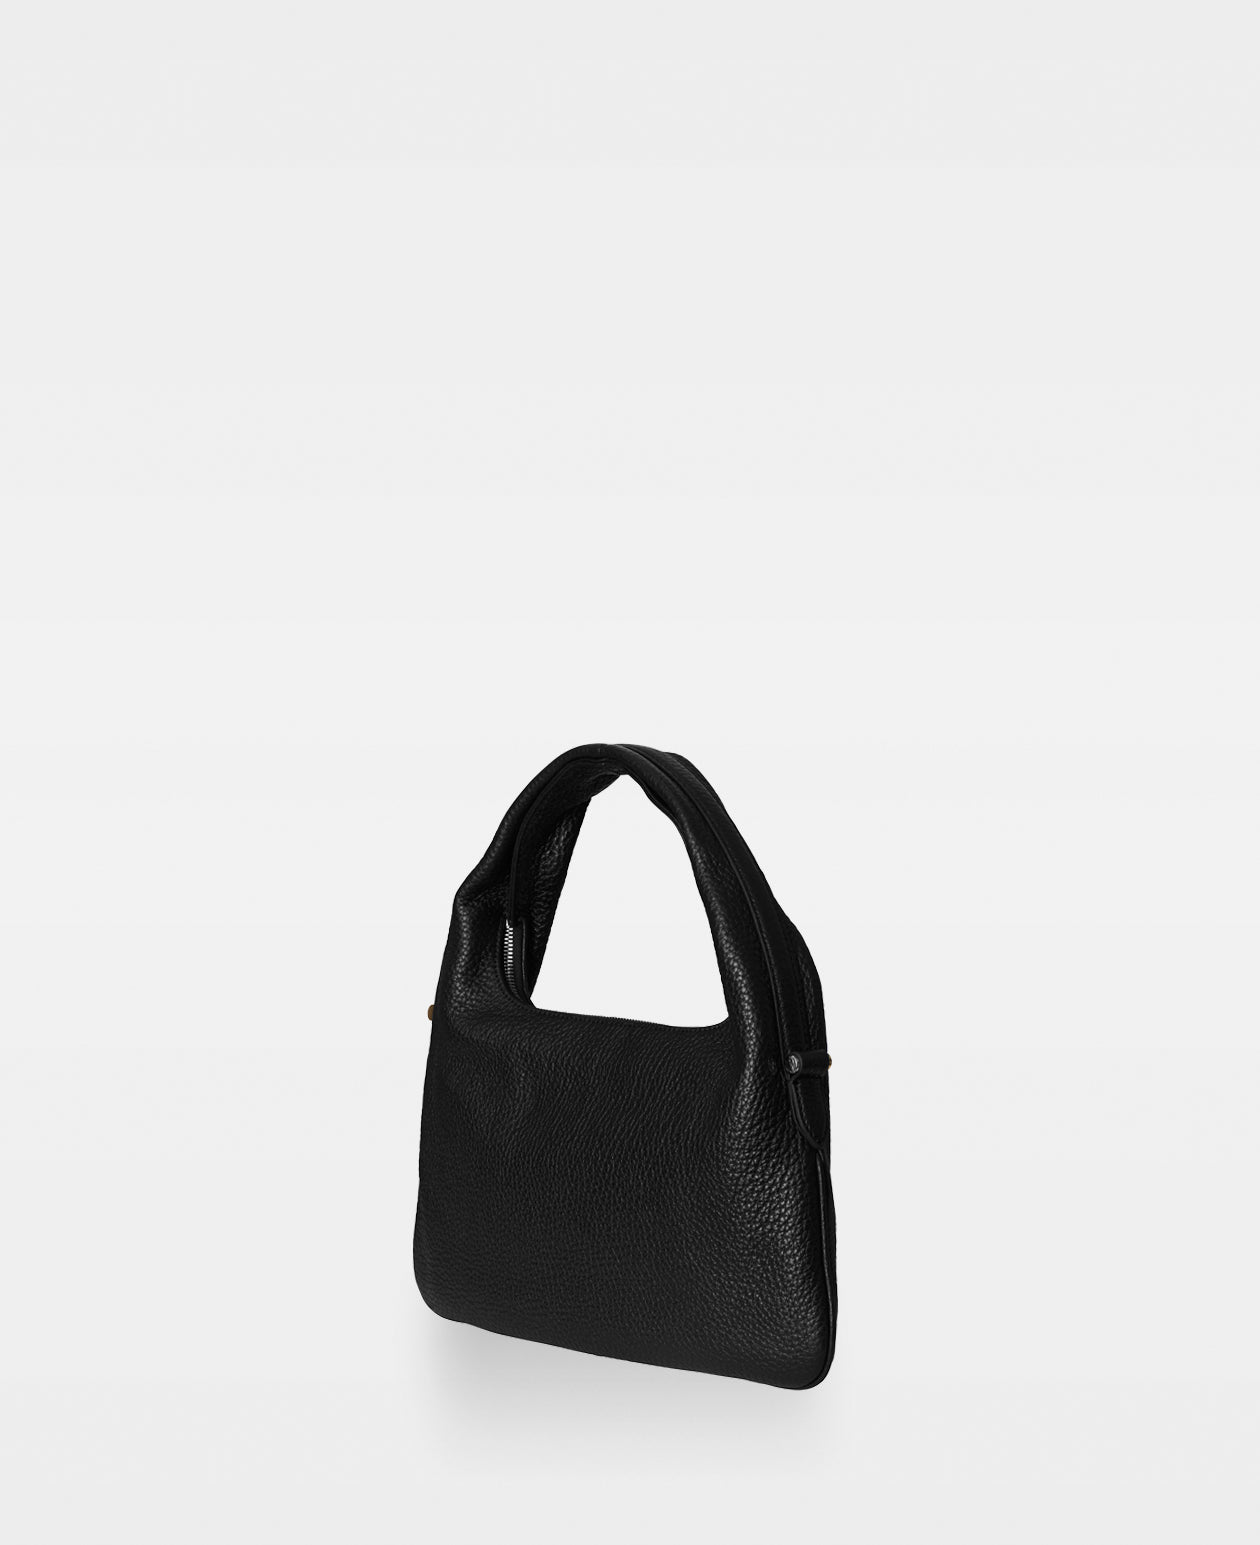 Tracy Small Shoulder Bag, Order online now